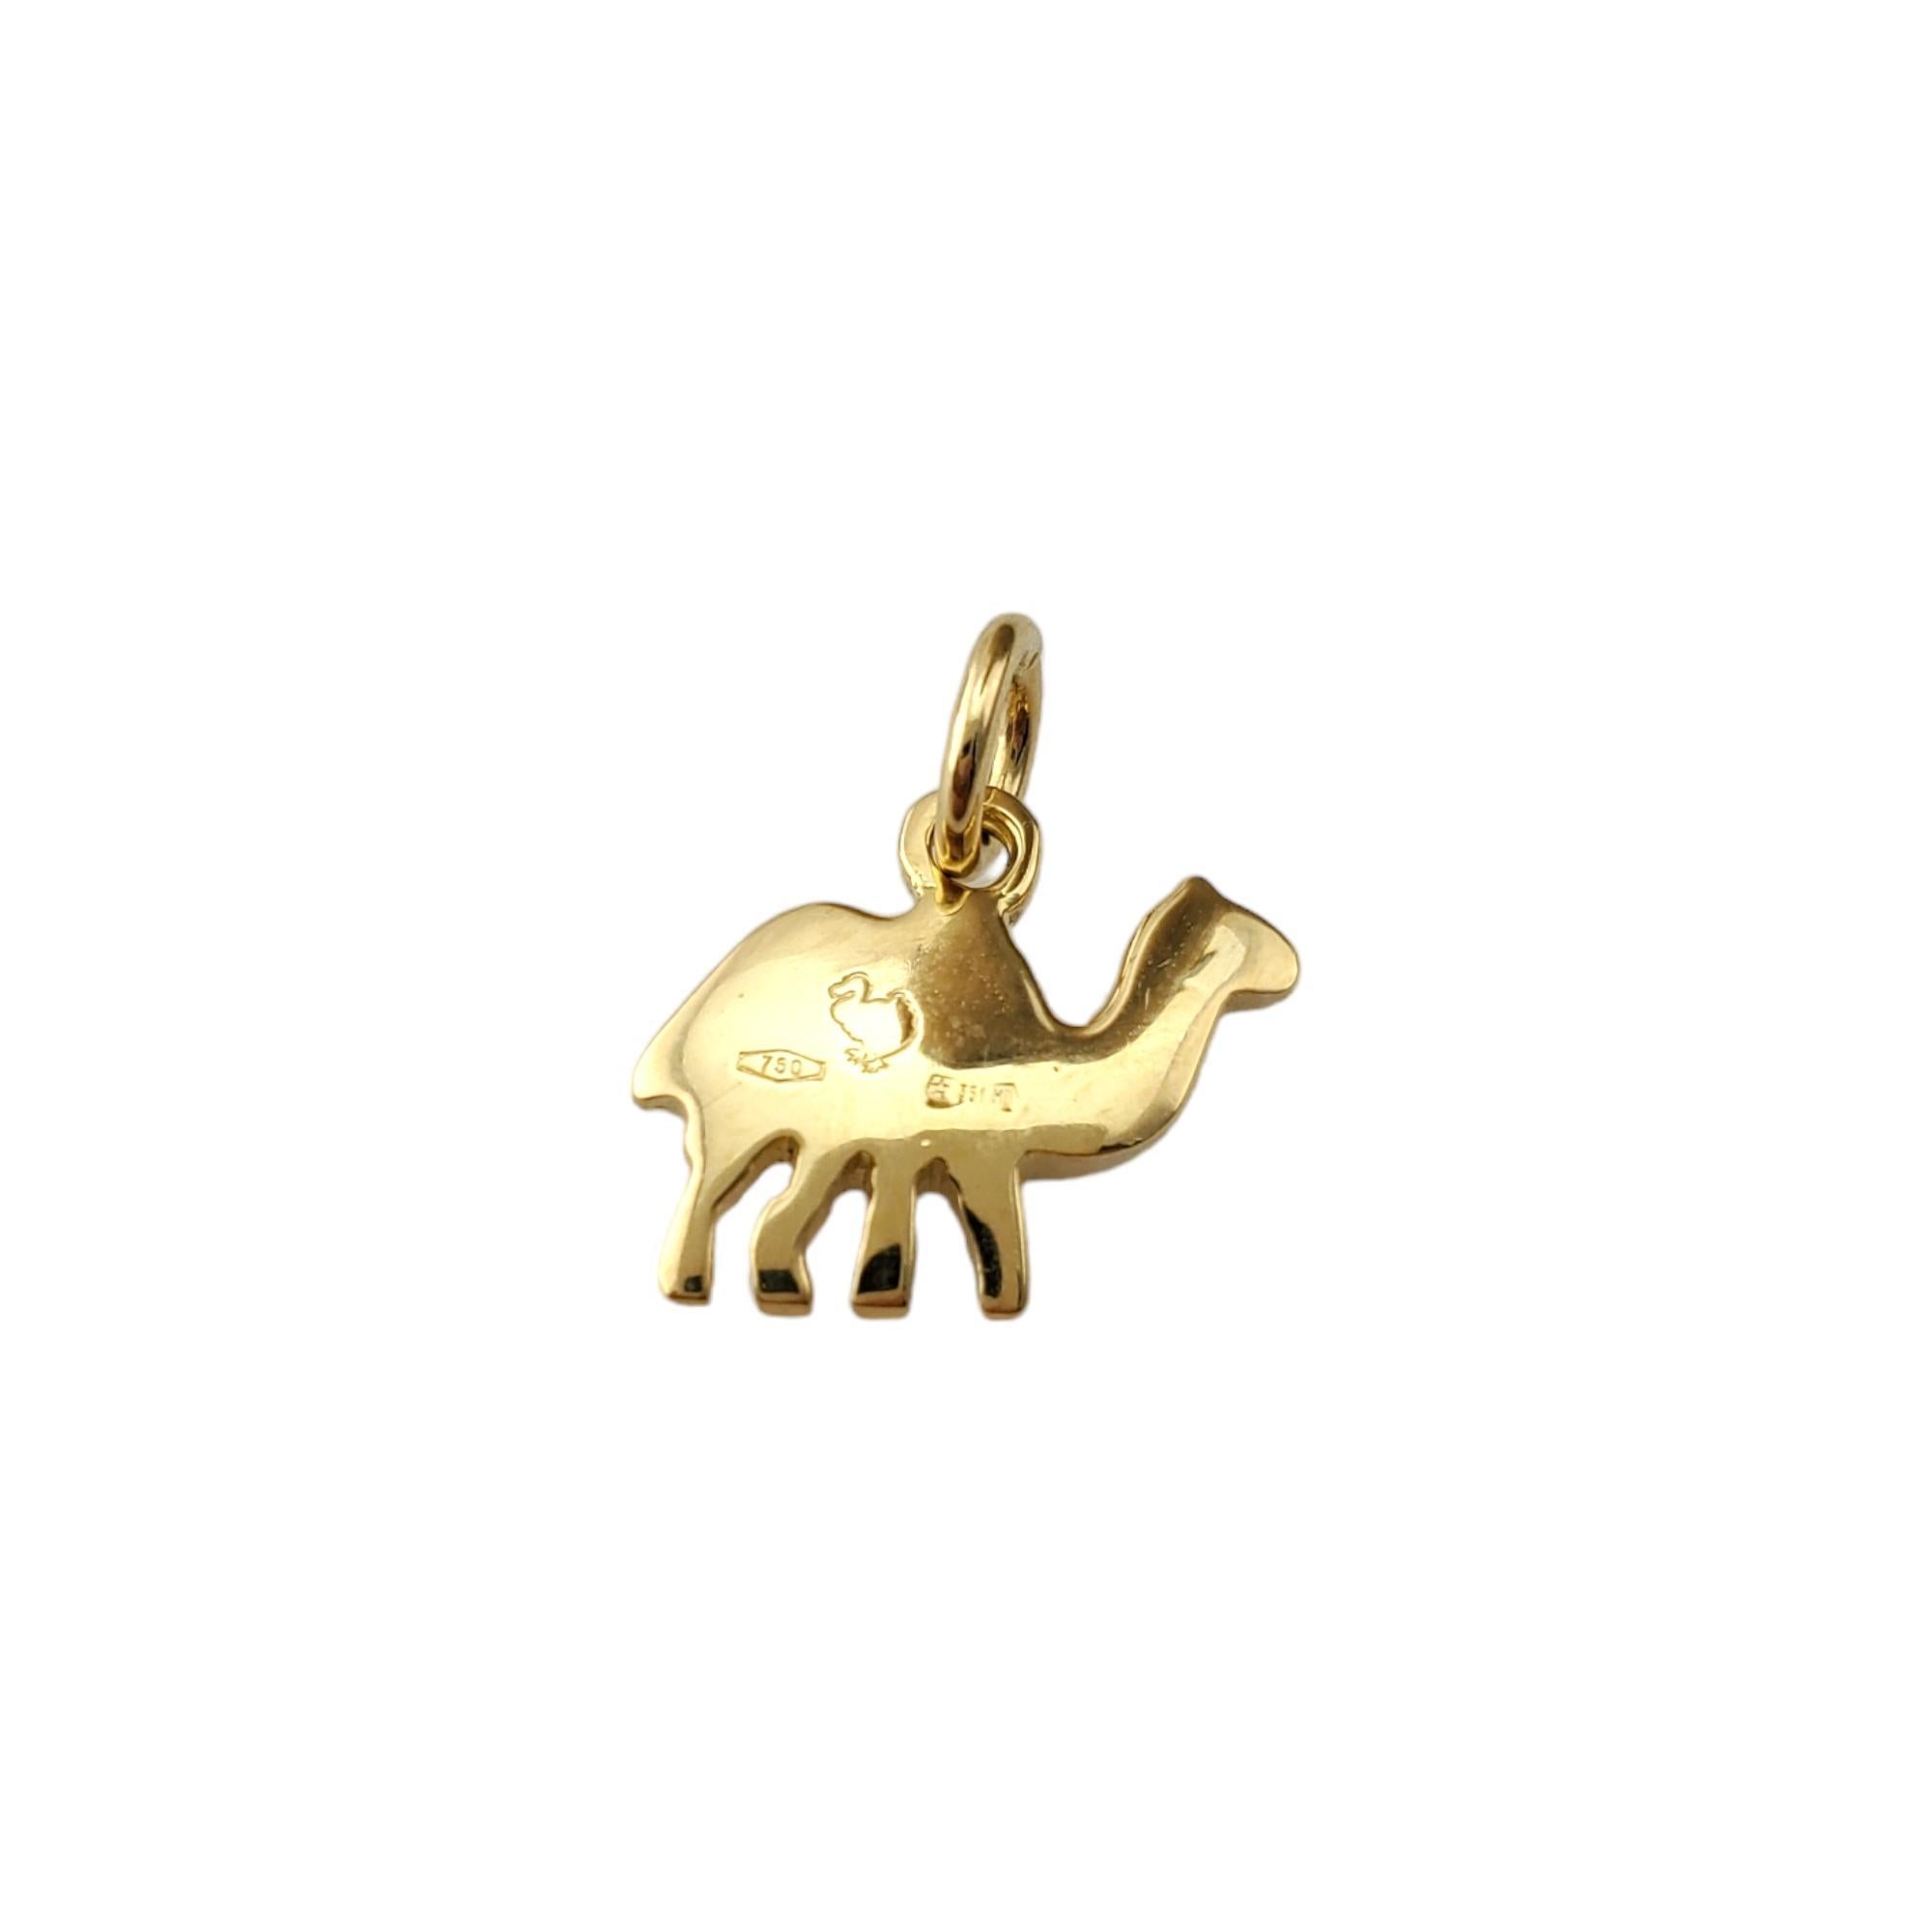 Dodo Pomellato 18K Yellow Gold Camel Charm

An adorable charm depicting a camel in 18K yellow gold.

Hallmark: 750 351 MI

Weight: 2.0 g/ 1.3 dwt.

Size: 14.1 mm X 11.1 mm X 2.2 mm

Very good condition, professionally polished.

Will come packaged